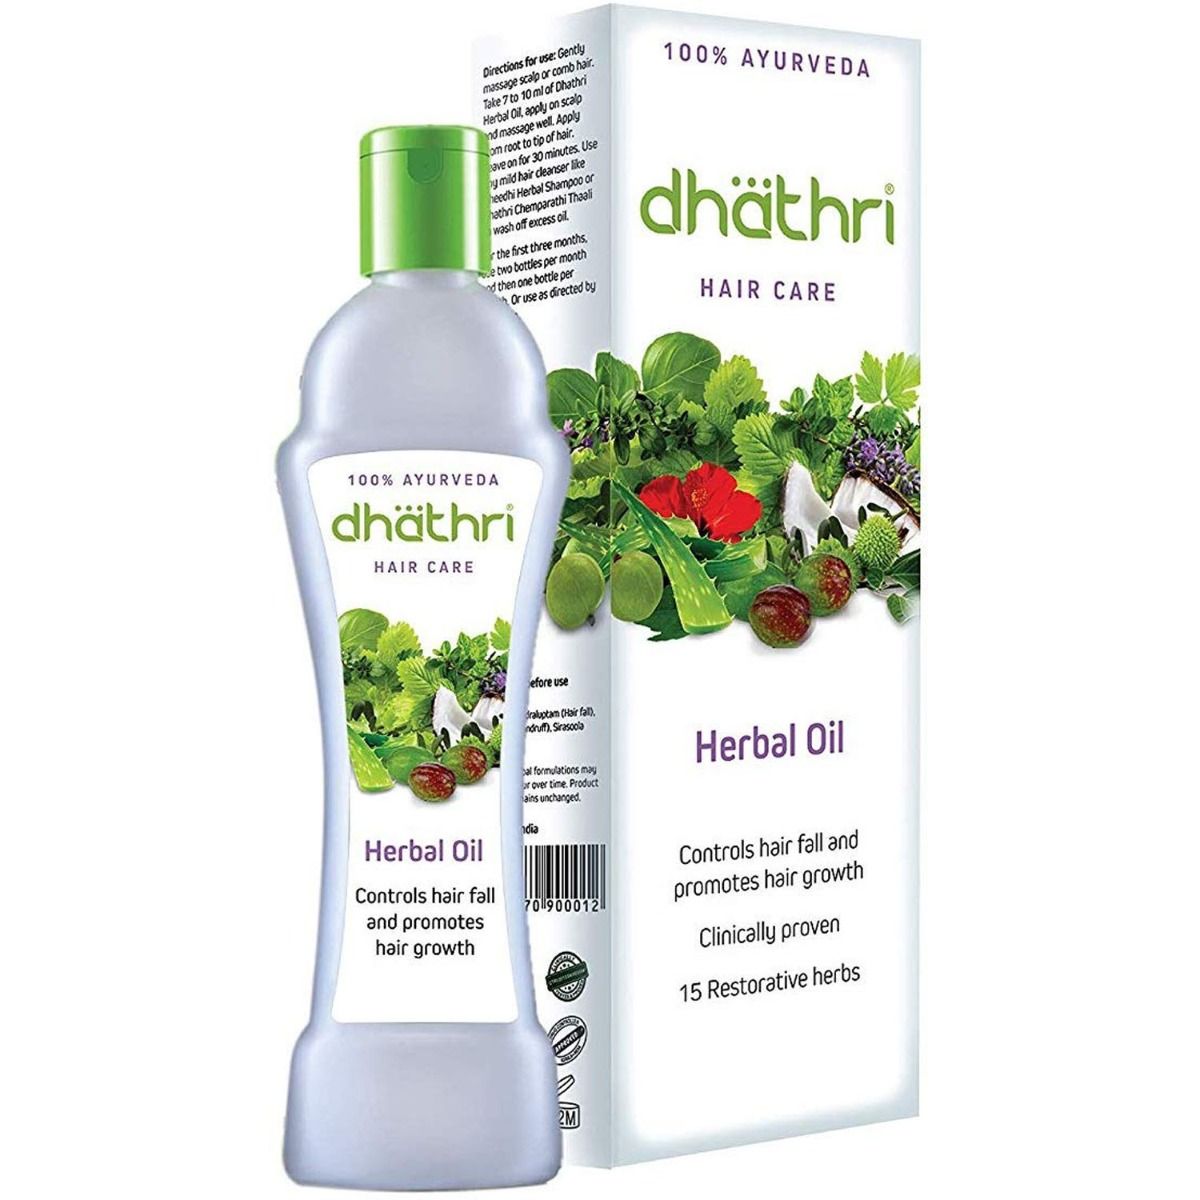 Dhathri Hair Care Herbal Oil, 100 ml Price, Uses, Side Effects, Composition  - Apollo Pharmacy